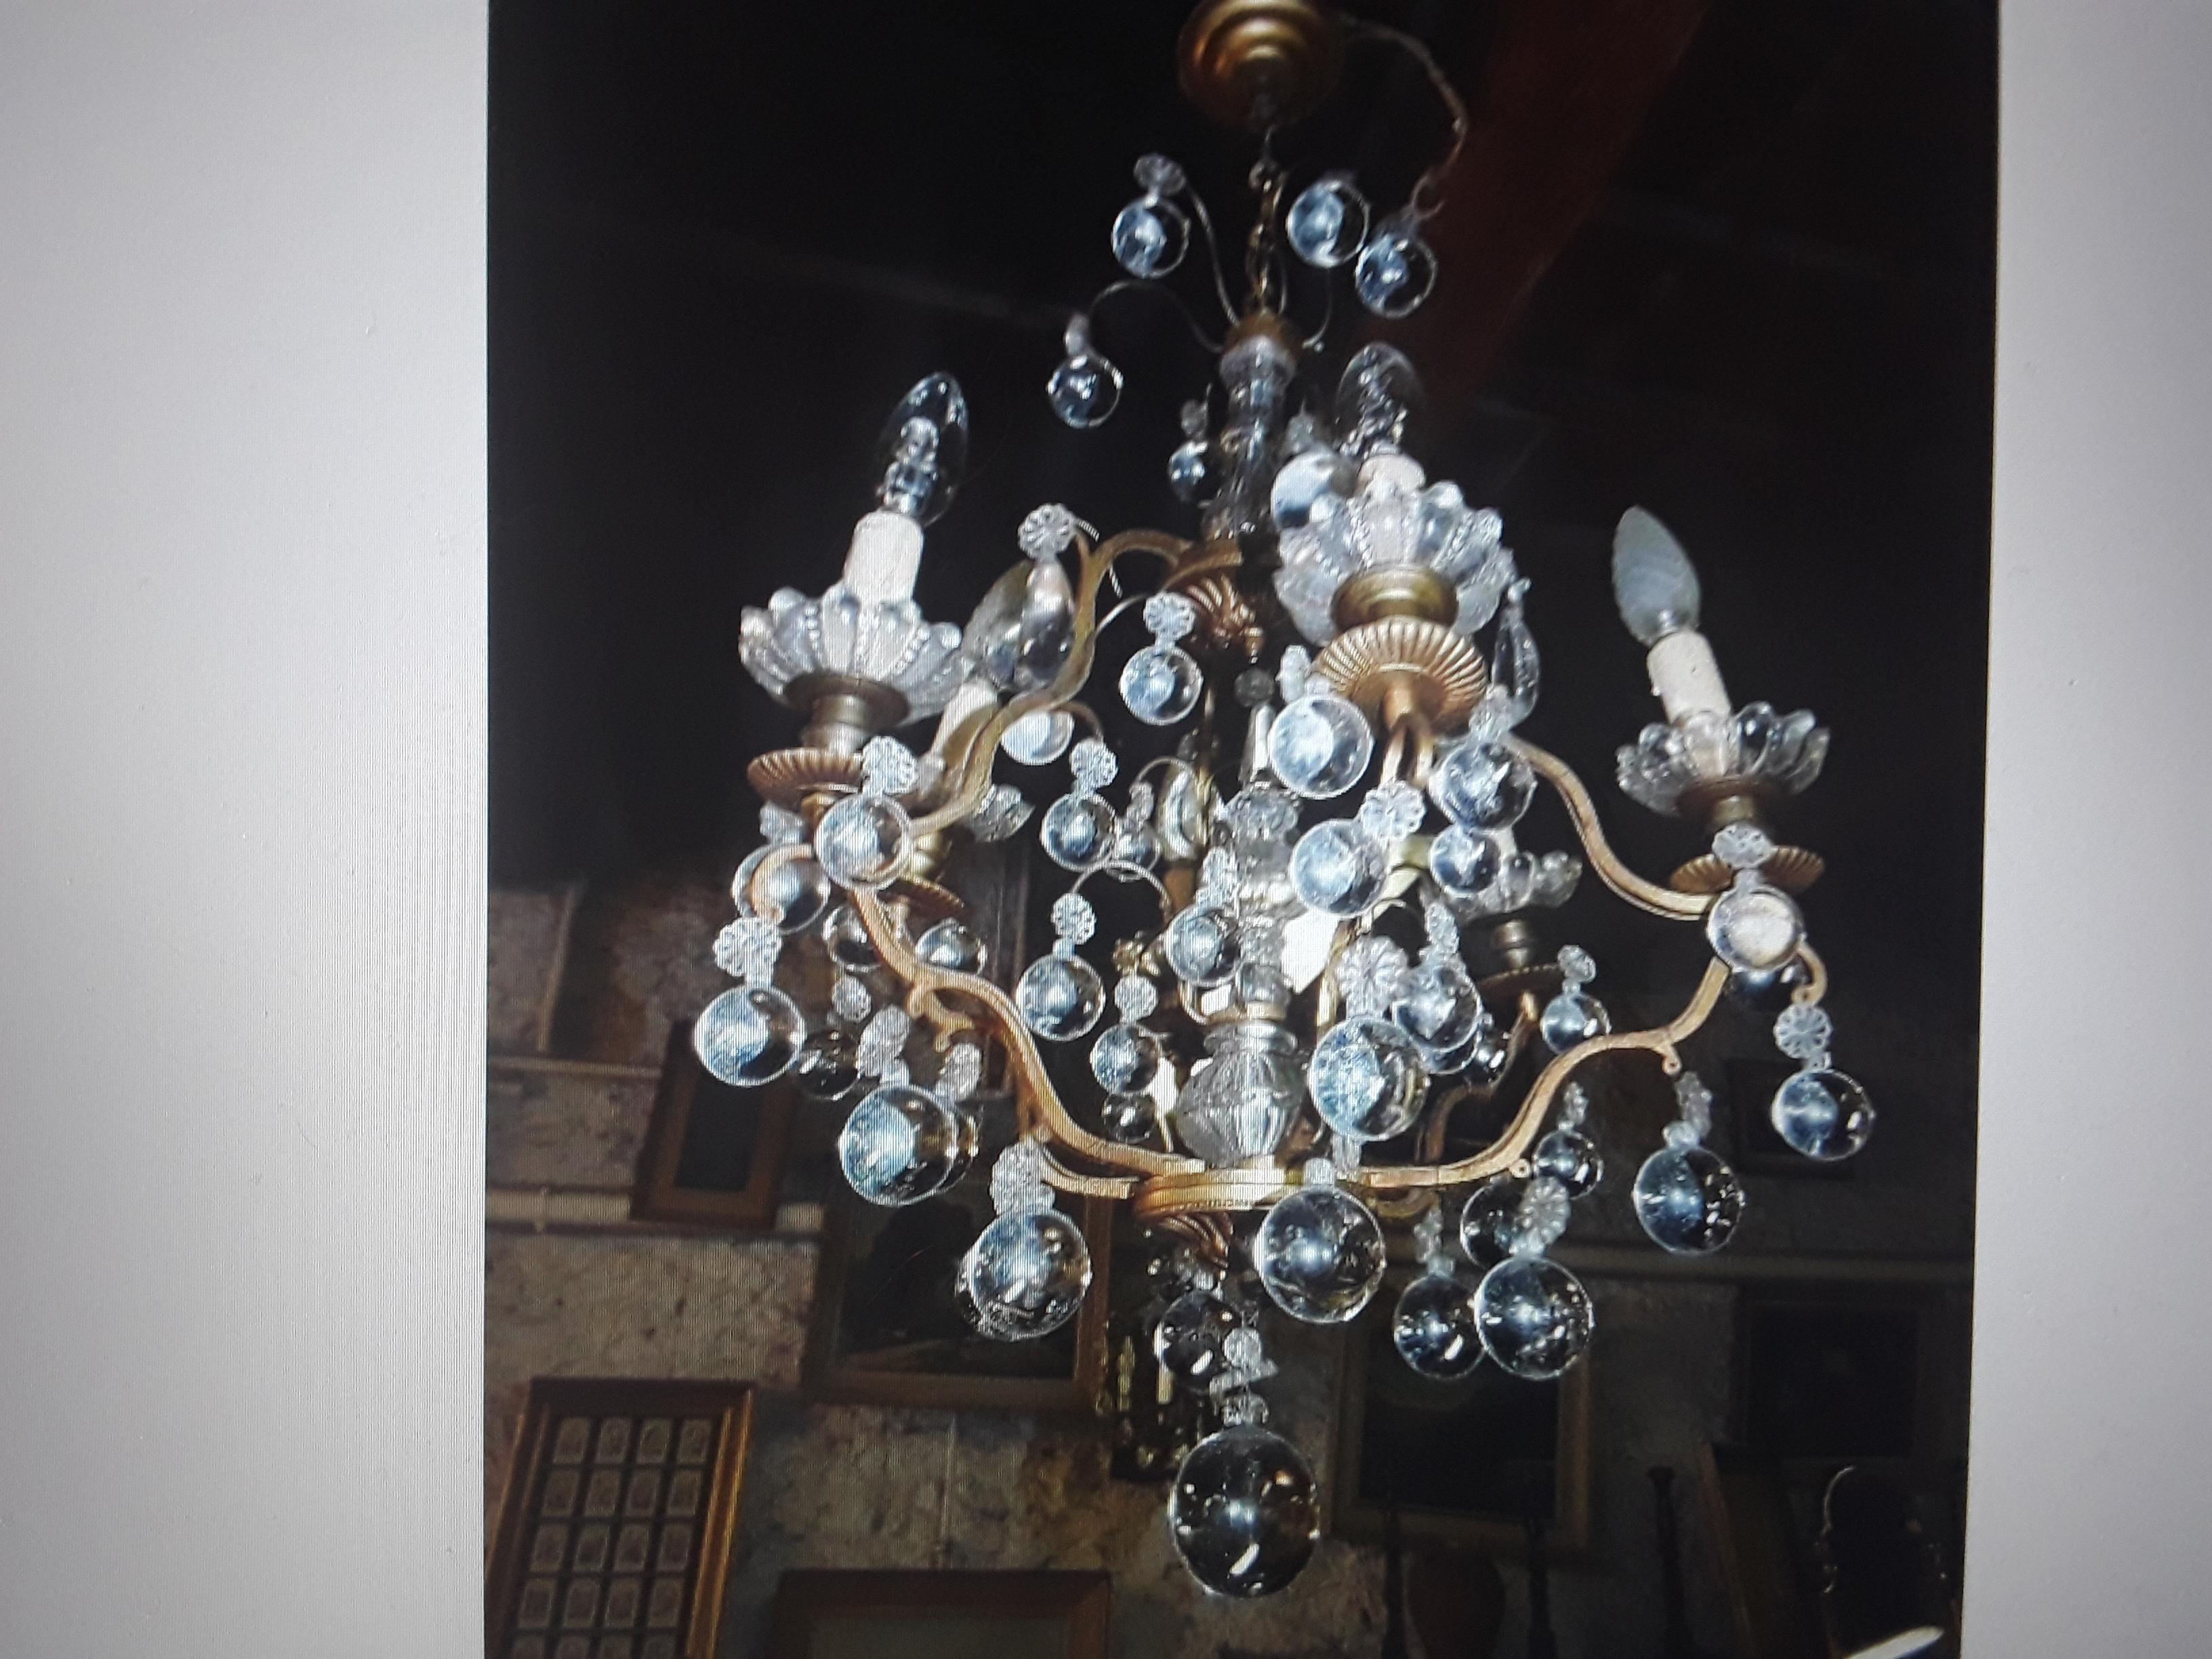 Stunning 1920's French Art Deco Bronze Caged Crystal Bubble Fantasy Chandelier DeLuxe! Beautiful chandelier here and ready to hang.